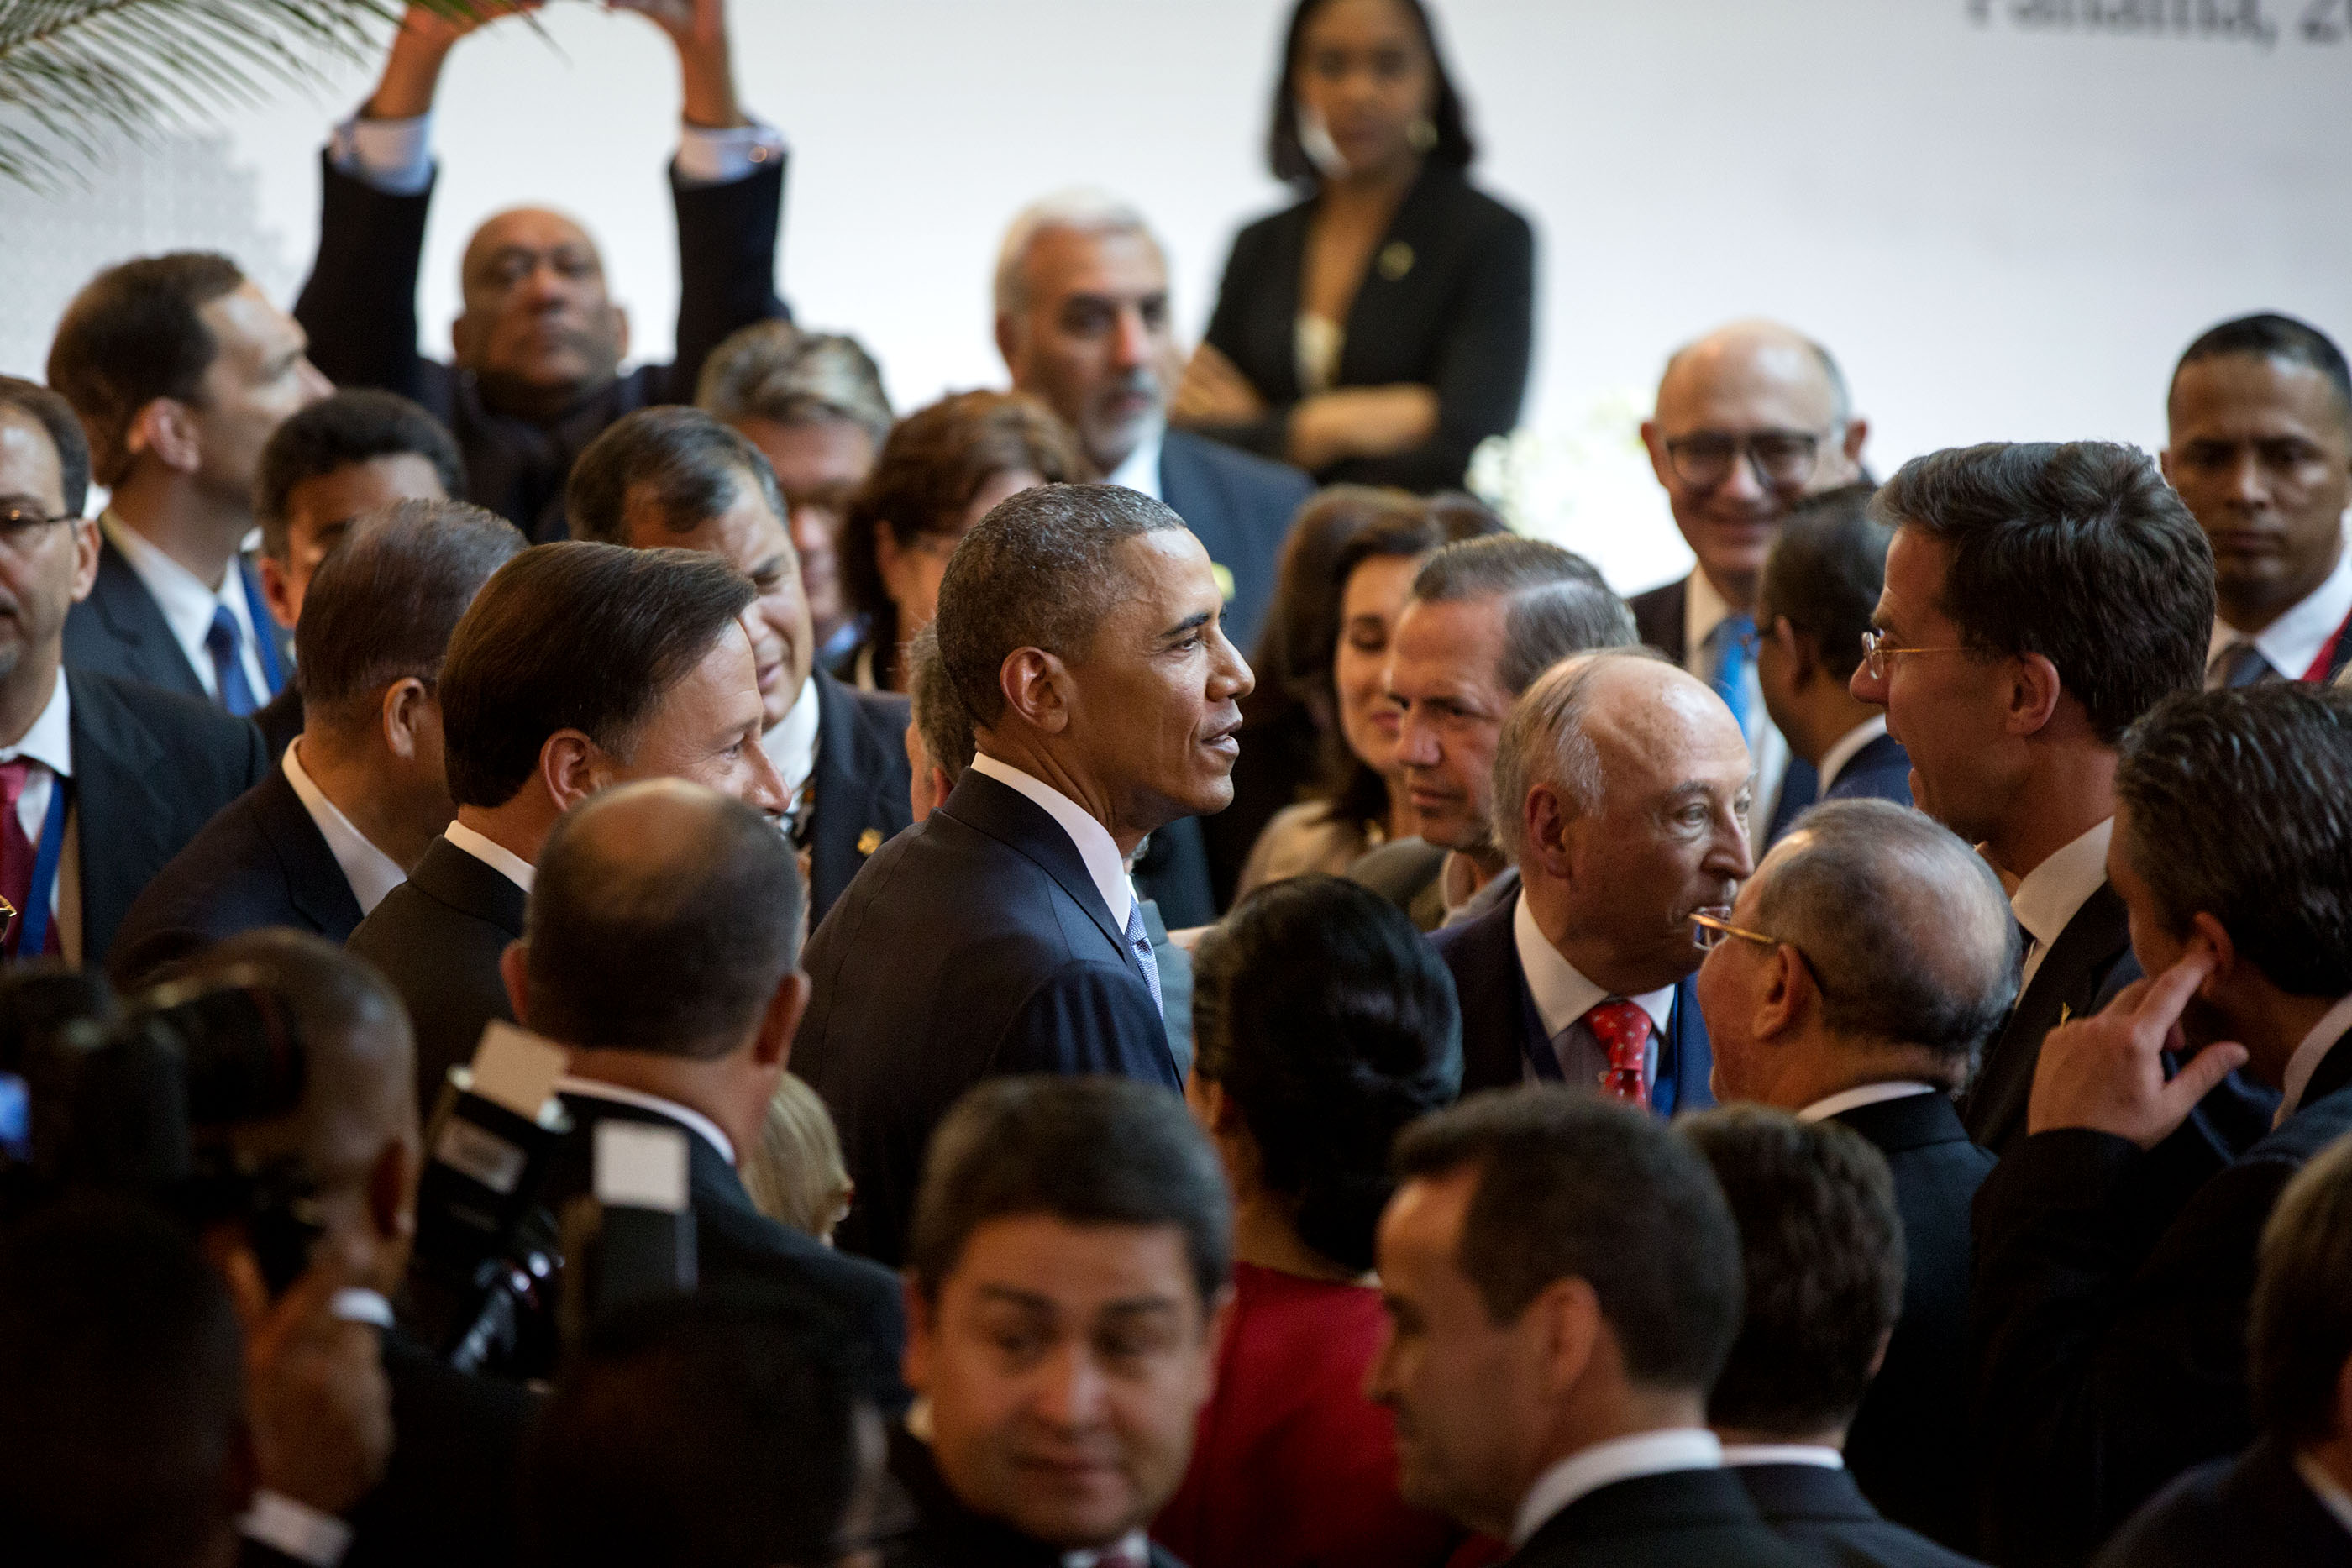 The President surrounded by world leaders in the leaders lounge. (Official White House Photo by Pete Souza)